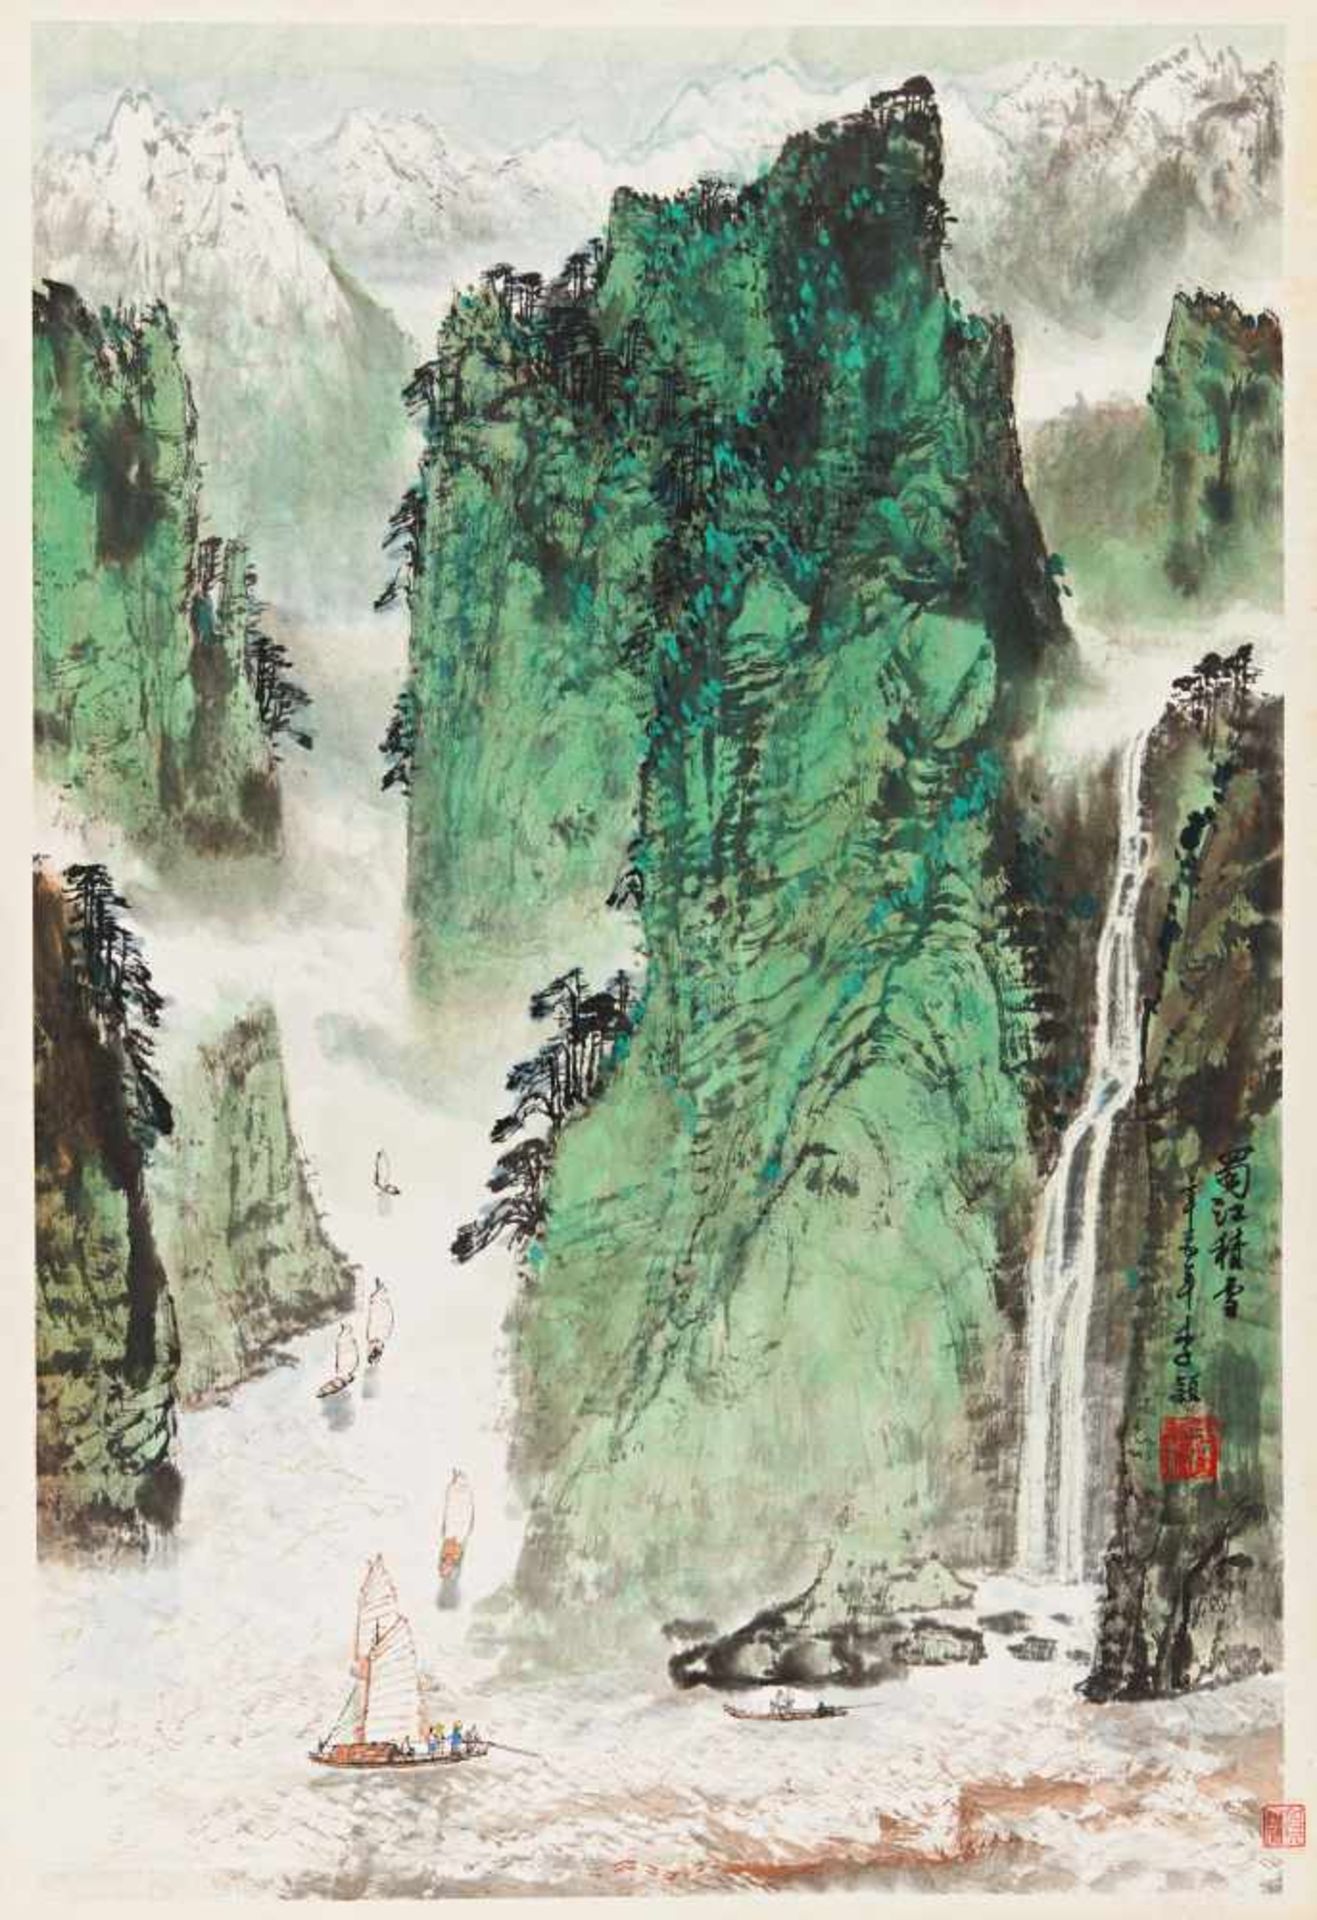 TWO PAINTINGS WITH MOUNTAIN LANDSCAPE RESP. MAGPIE AND PLUM. China. Dated 1981. Li Ying (1934-